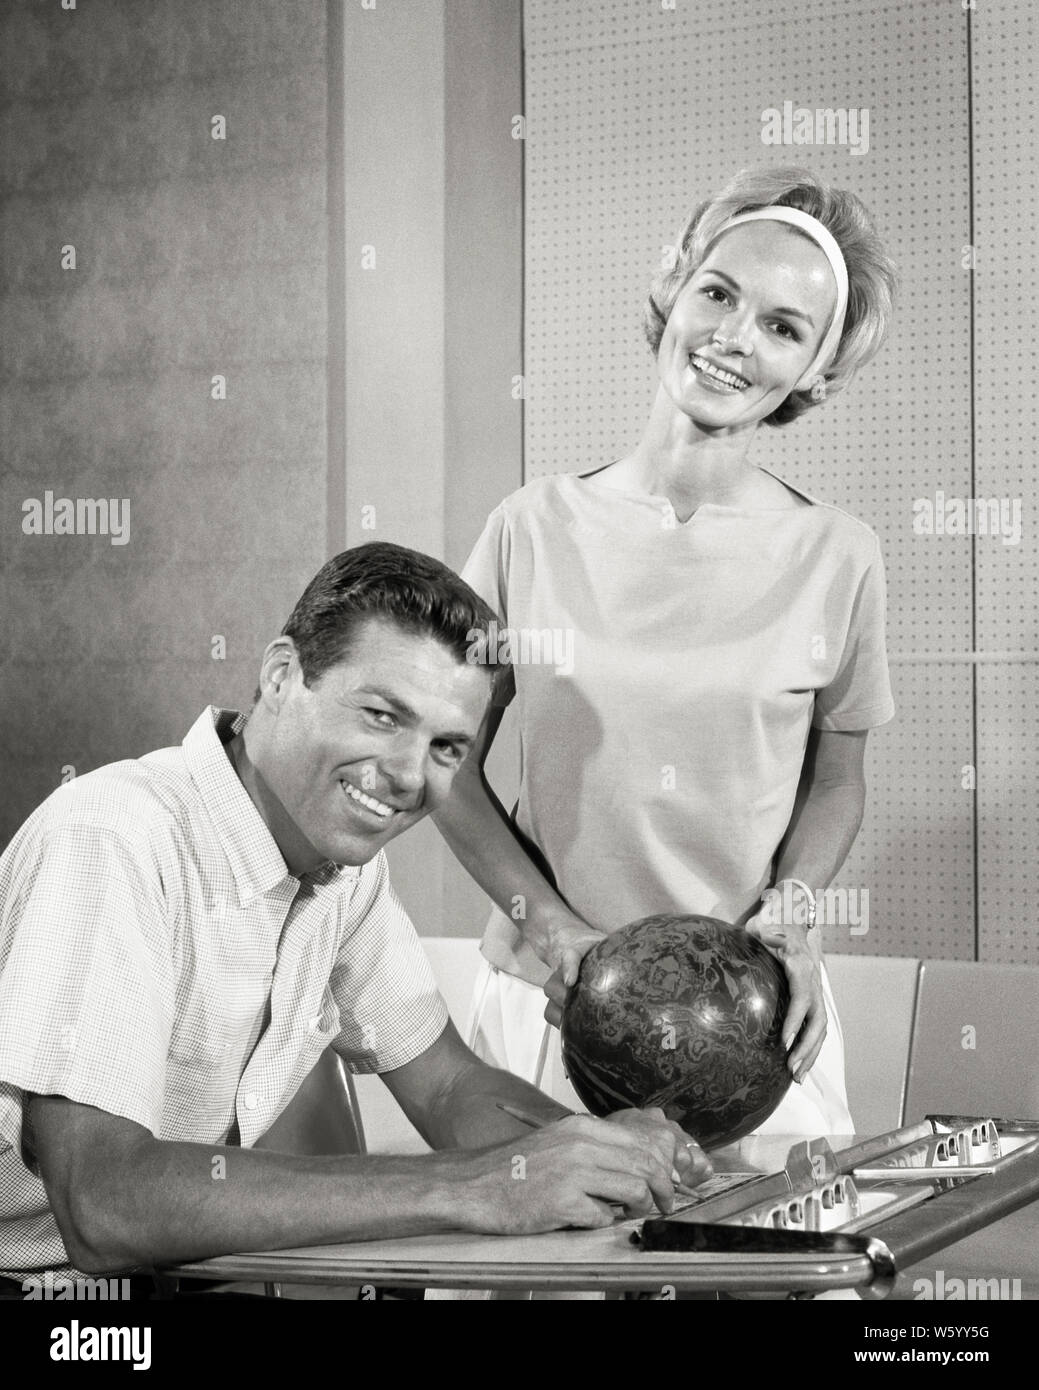 1960s SMILING COUPLE MAN KEEPING SCORE AND WOMAN HOLDING BOWLING BALL BOTH LOOKING AT CAMERA - s12814 HAR001 HARS TEAMWORK COMPETITION INFORMATION SCORE ATHLETE PLEASED JOY LIFESTYLE SATISFACTION FEMALES MARRIED SPOUSE HUSBANDS BOWLER HEALTHINESS COPY SPACE FRIENDSHIP HALF-LENGTH LADIES PERSONS MALES ATHLETIC CONFIDENCE B&W LANE PARTNER EYE CONTACT DATING ACTIVITY HAPPINESS PHYSICAL BOWLING BALL CHEERFUL LEISURE STRENGTH AND EXCITEMENT RECREATION ATTRACTION SMILES COURTSHIP FLEXIBILITY JOYFUL MUSCLES STYLISH POSSIBILITY COOPERATION KEEPING MID-ADULT RELAXATION SOCIAL ACTIVITY TOGETHERNESS Stock Photo